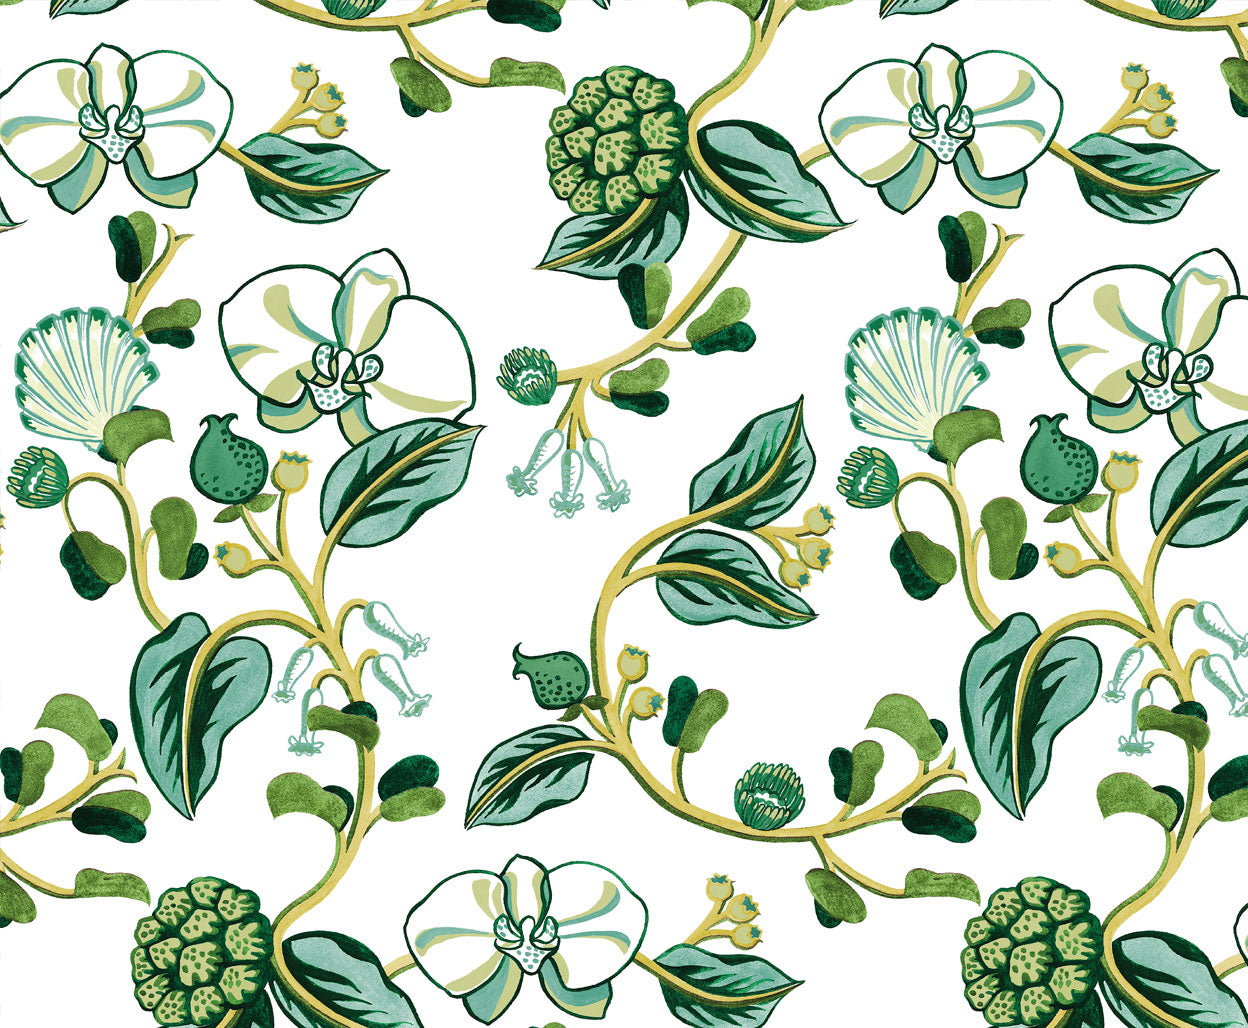 Detail of wallpaper in a varied floral print in shades of green and yellow on a white field.